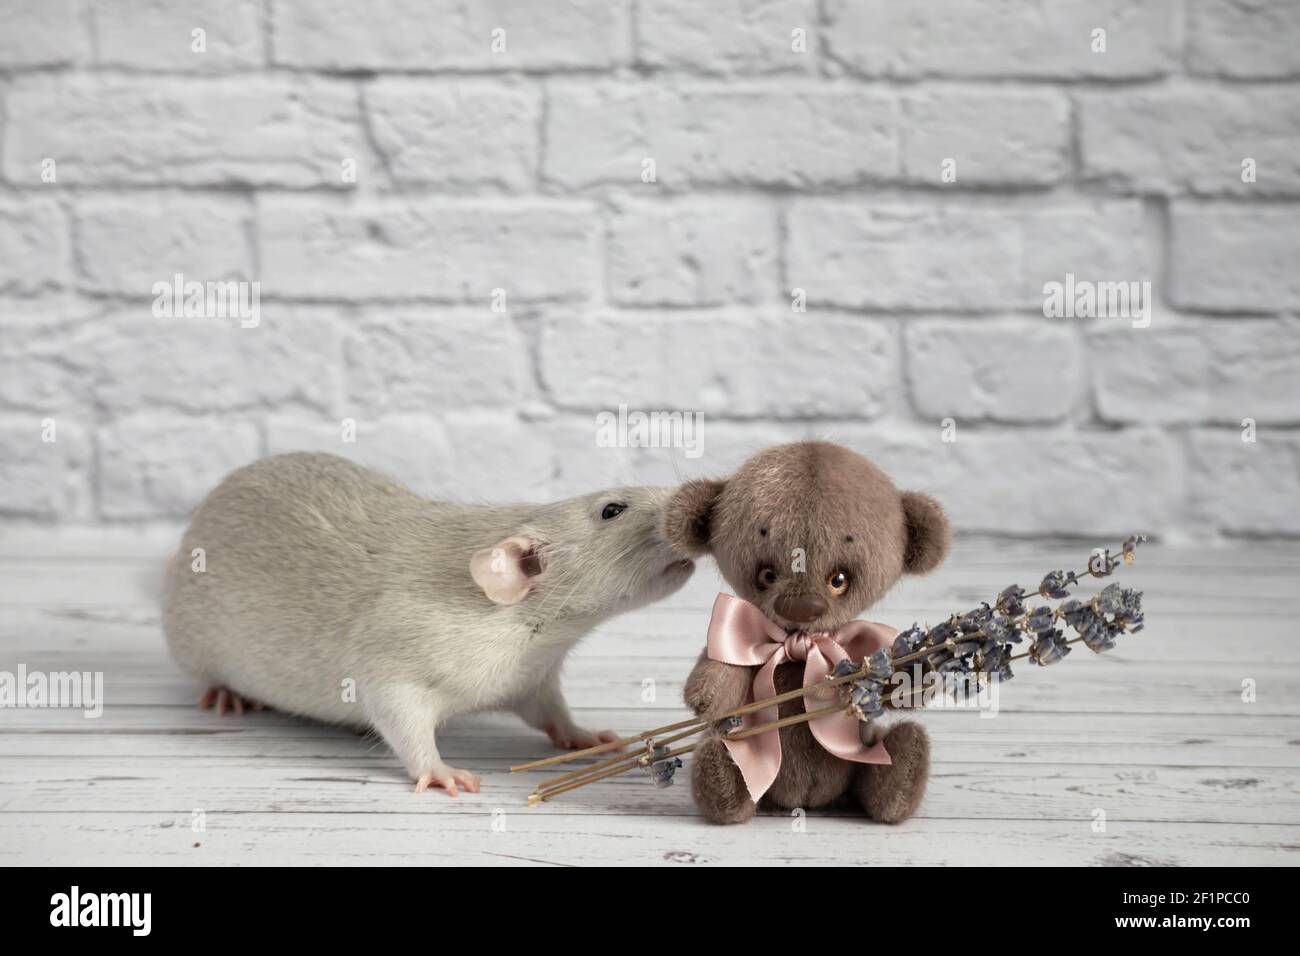 A cute and funny gray decorative rat bites a teddy bear toy by the ear. Rodent close-up portrait Stock Photo